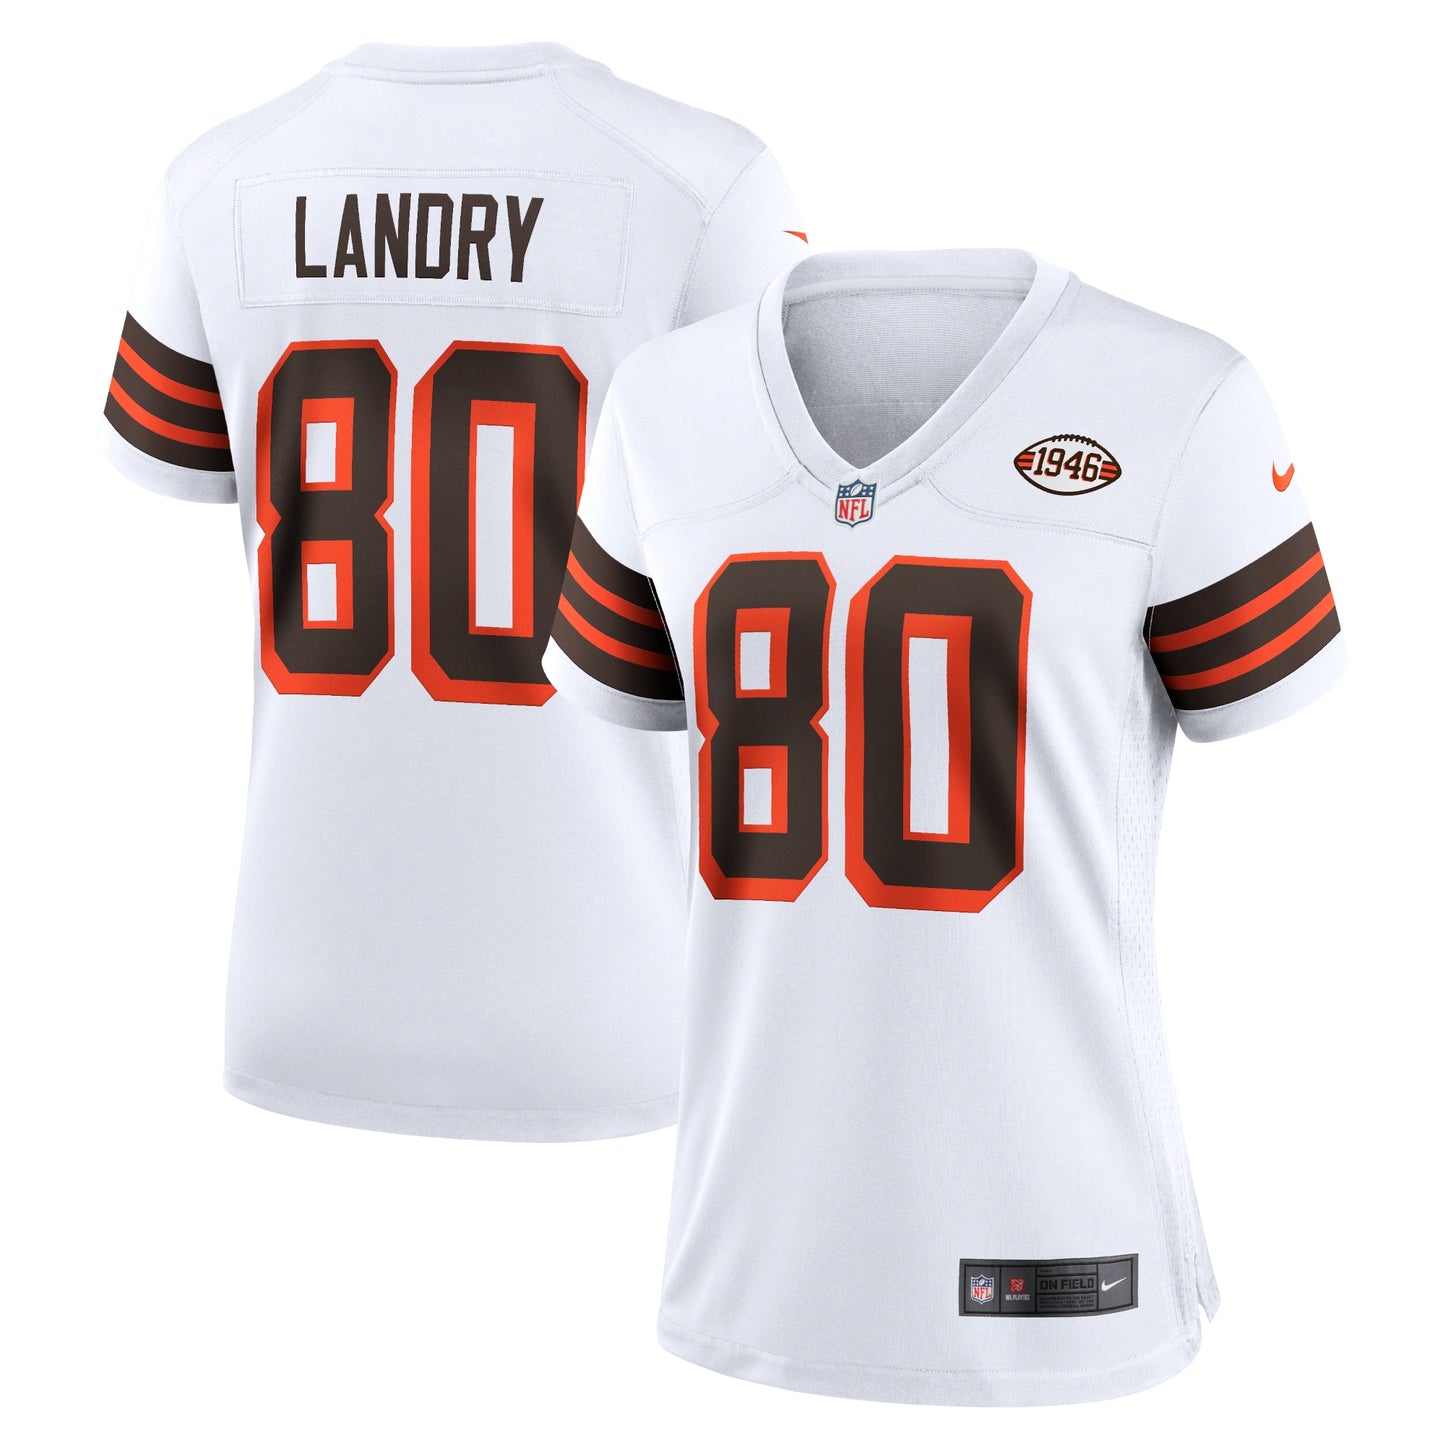 Jarvis Landry Cleveland Browns Nike Women's 1946 Collection Alternate Game Jersey - White